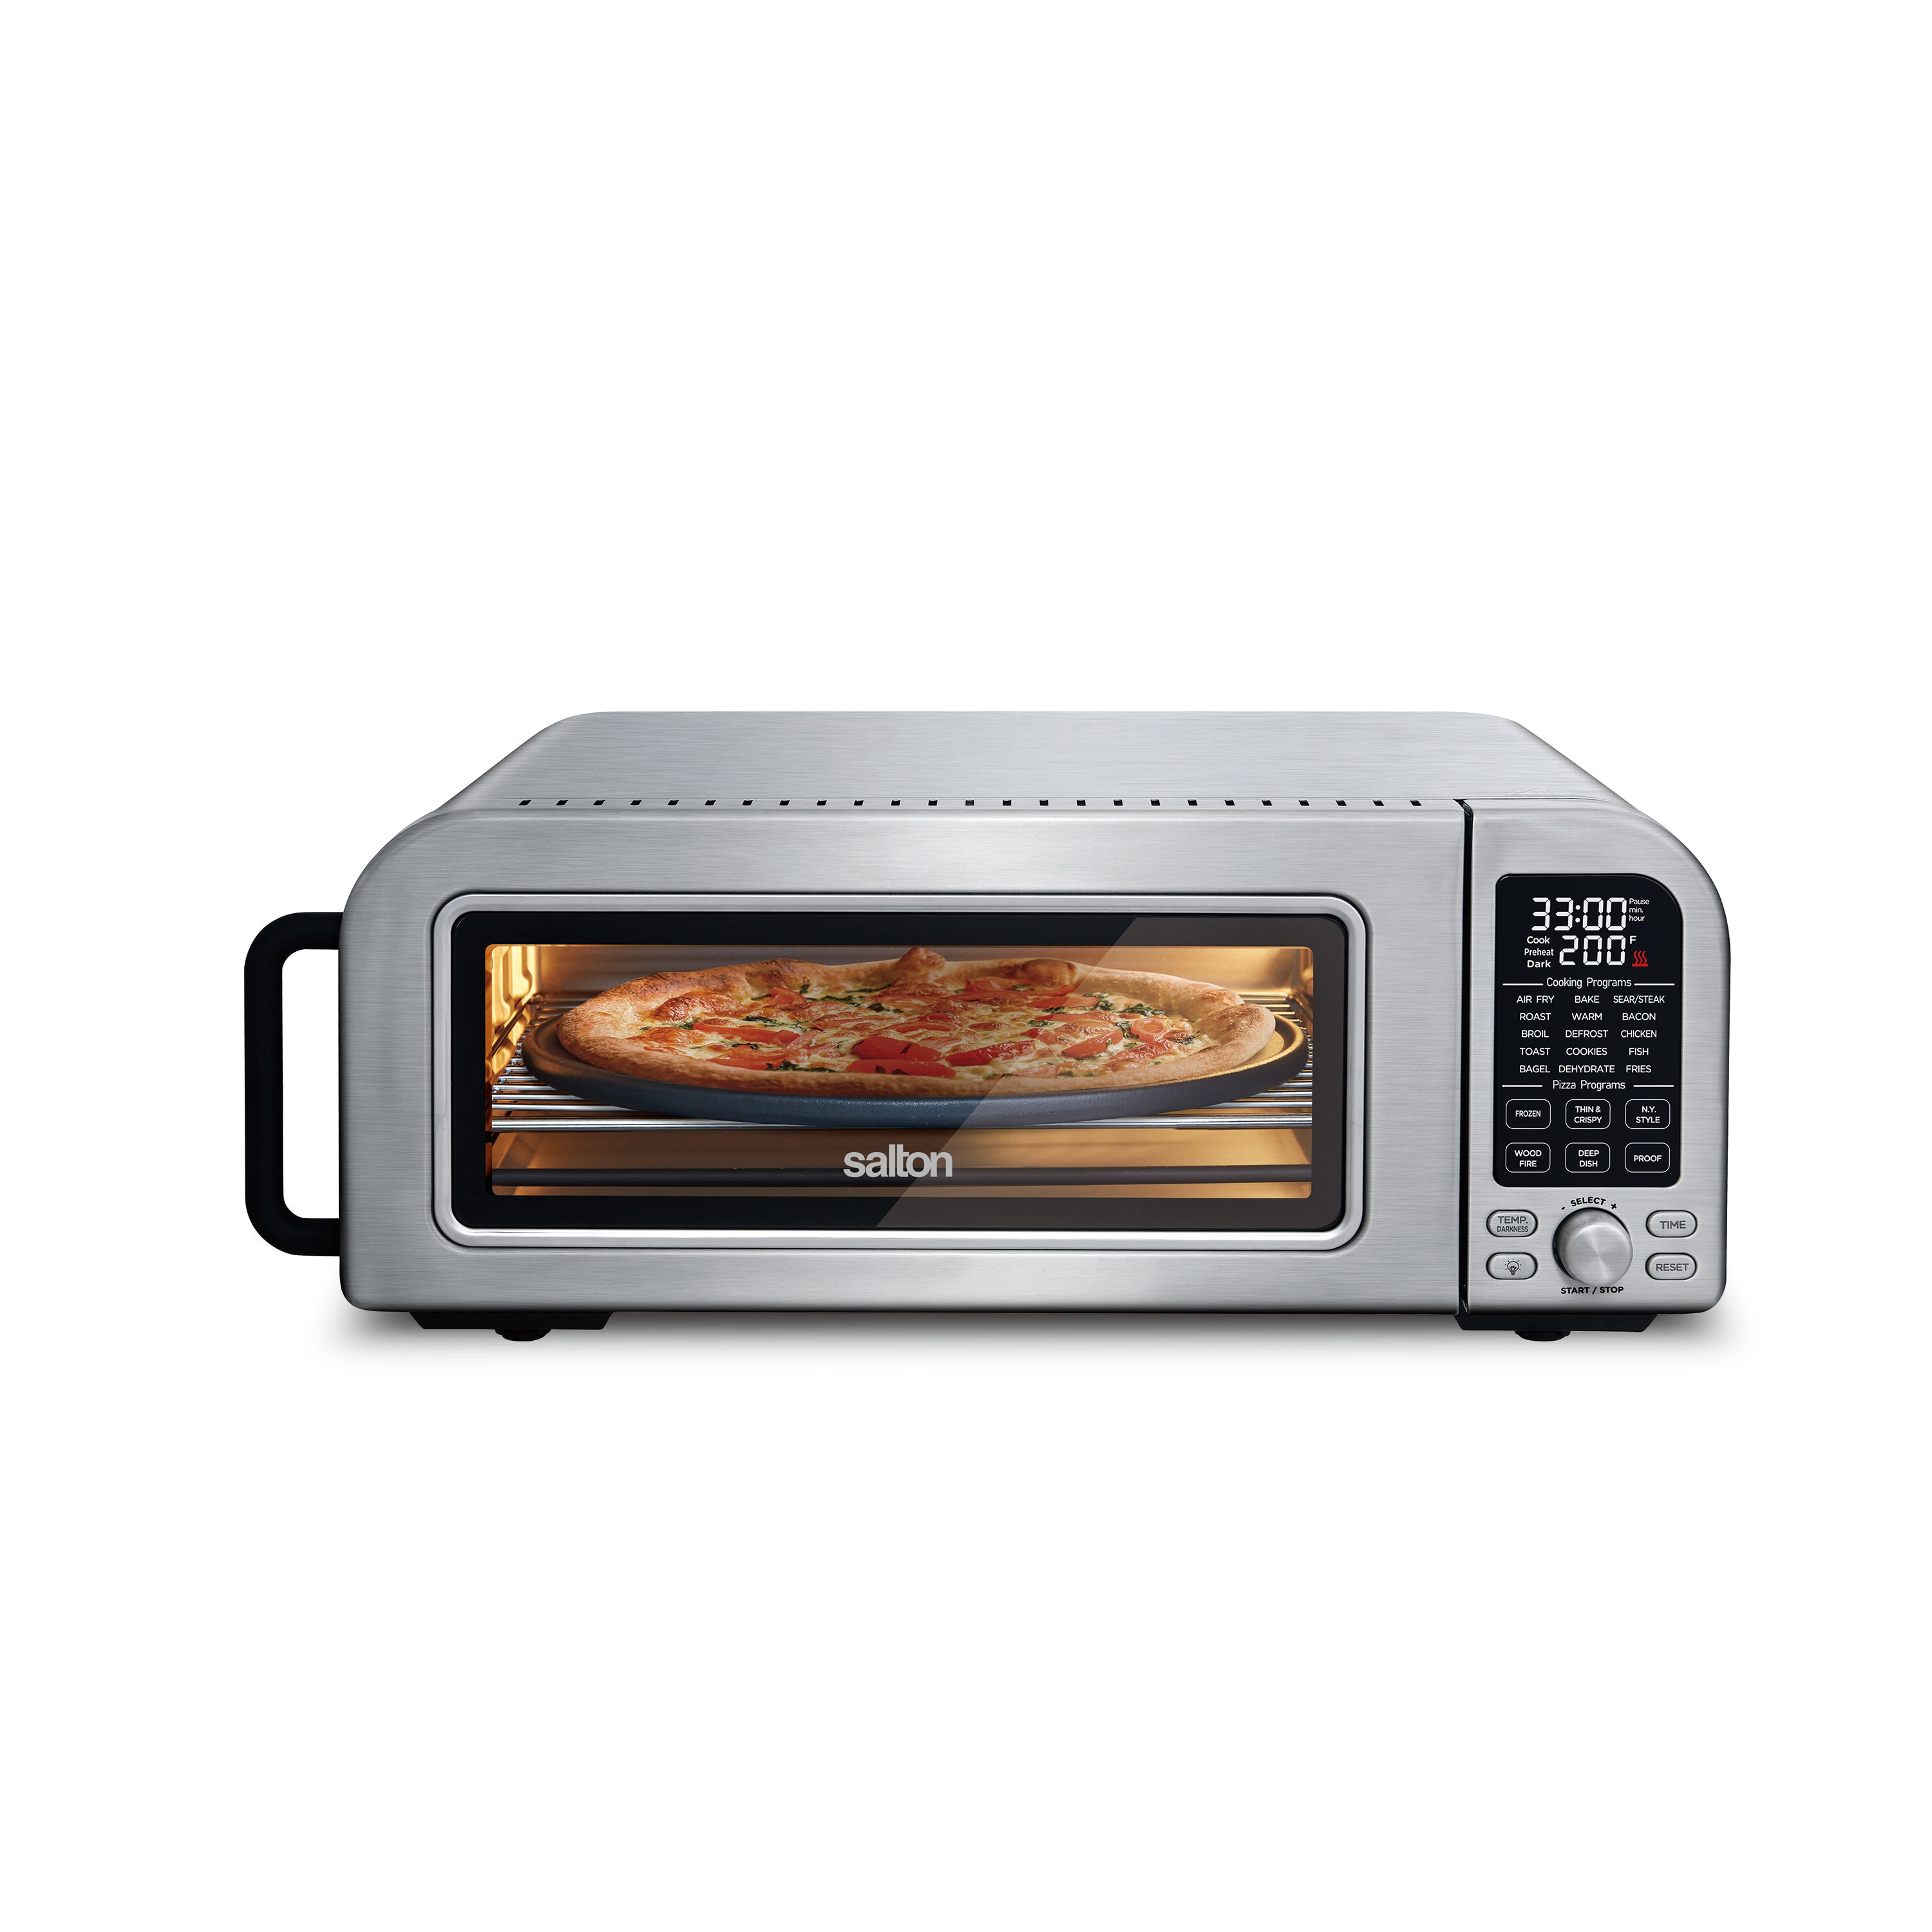 Ninja Foodi 10-in-1 XL Pro Air Fry Oven 6-Slice Stainless Steel Convection  Toaster Oven (1800-Watt) in the Toaster Ovens department at